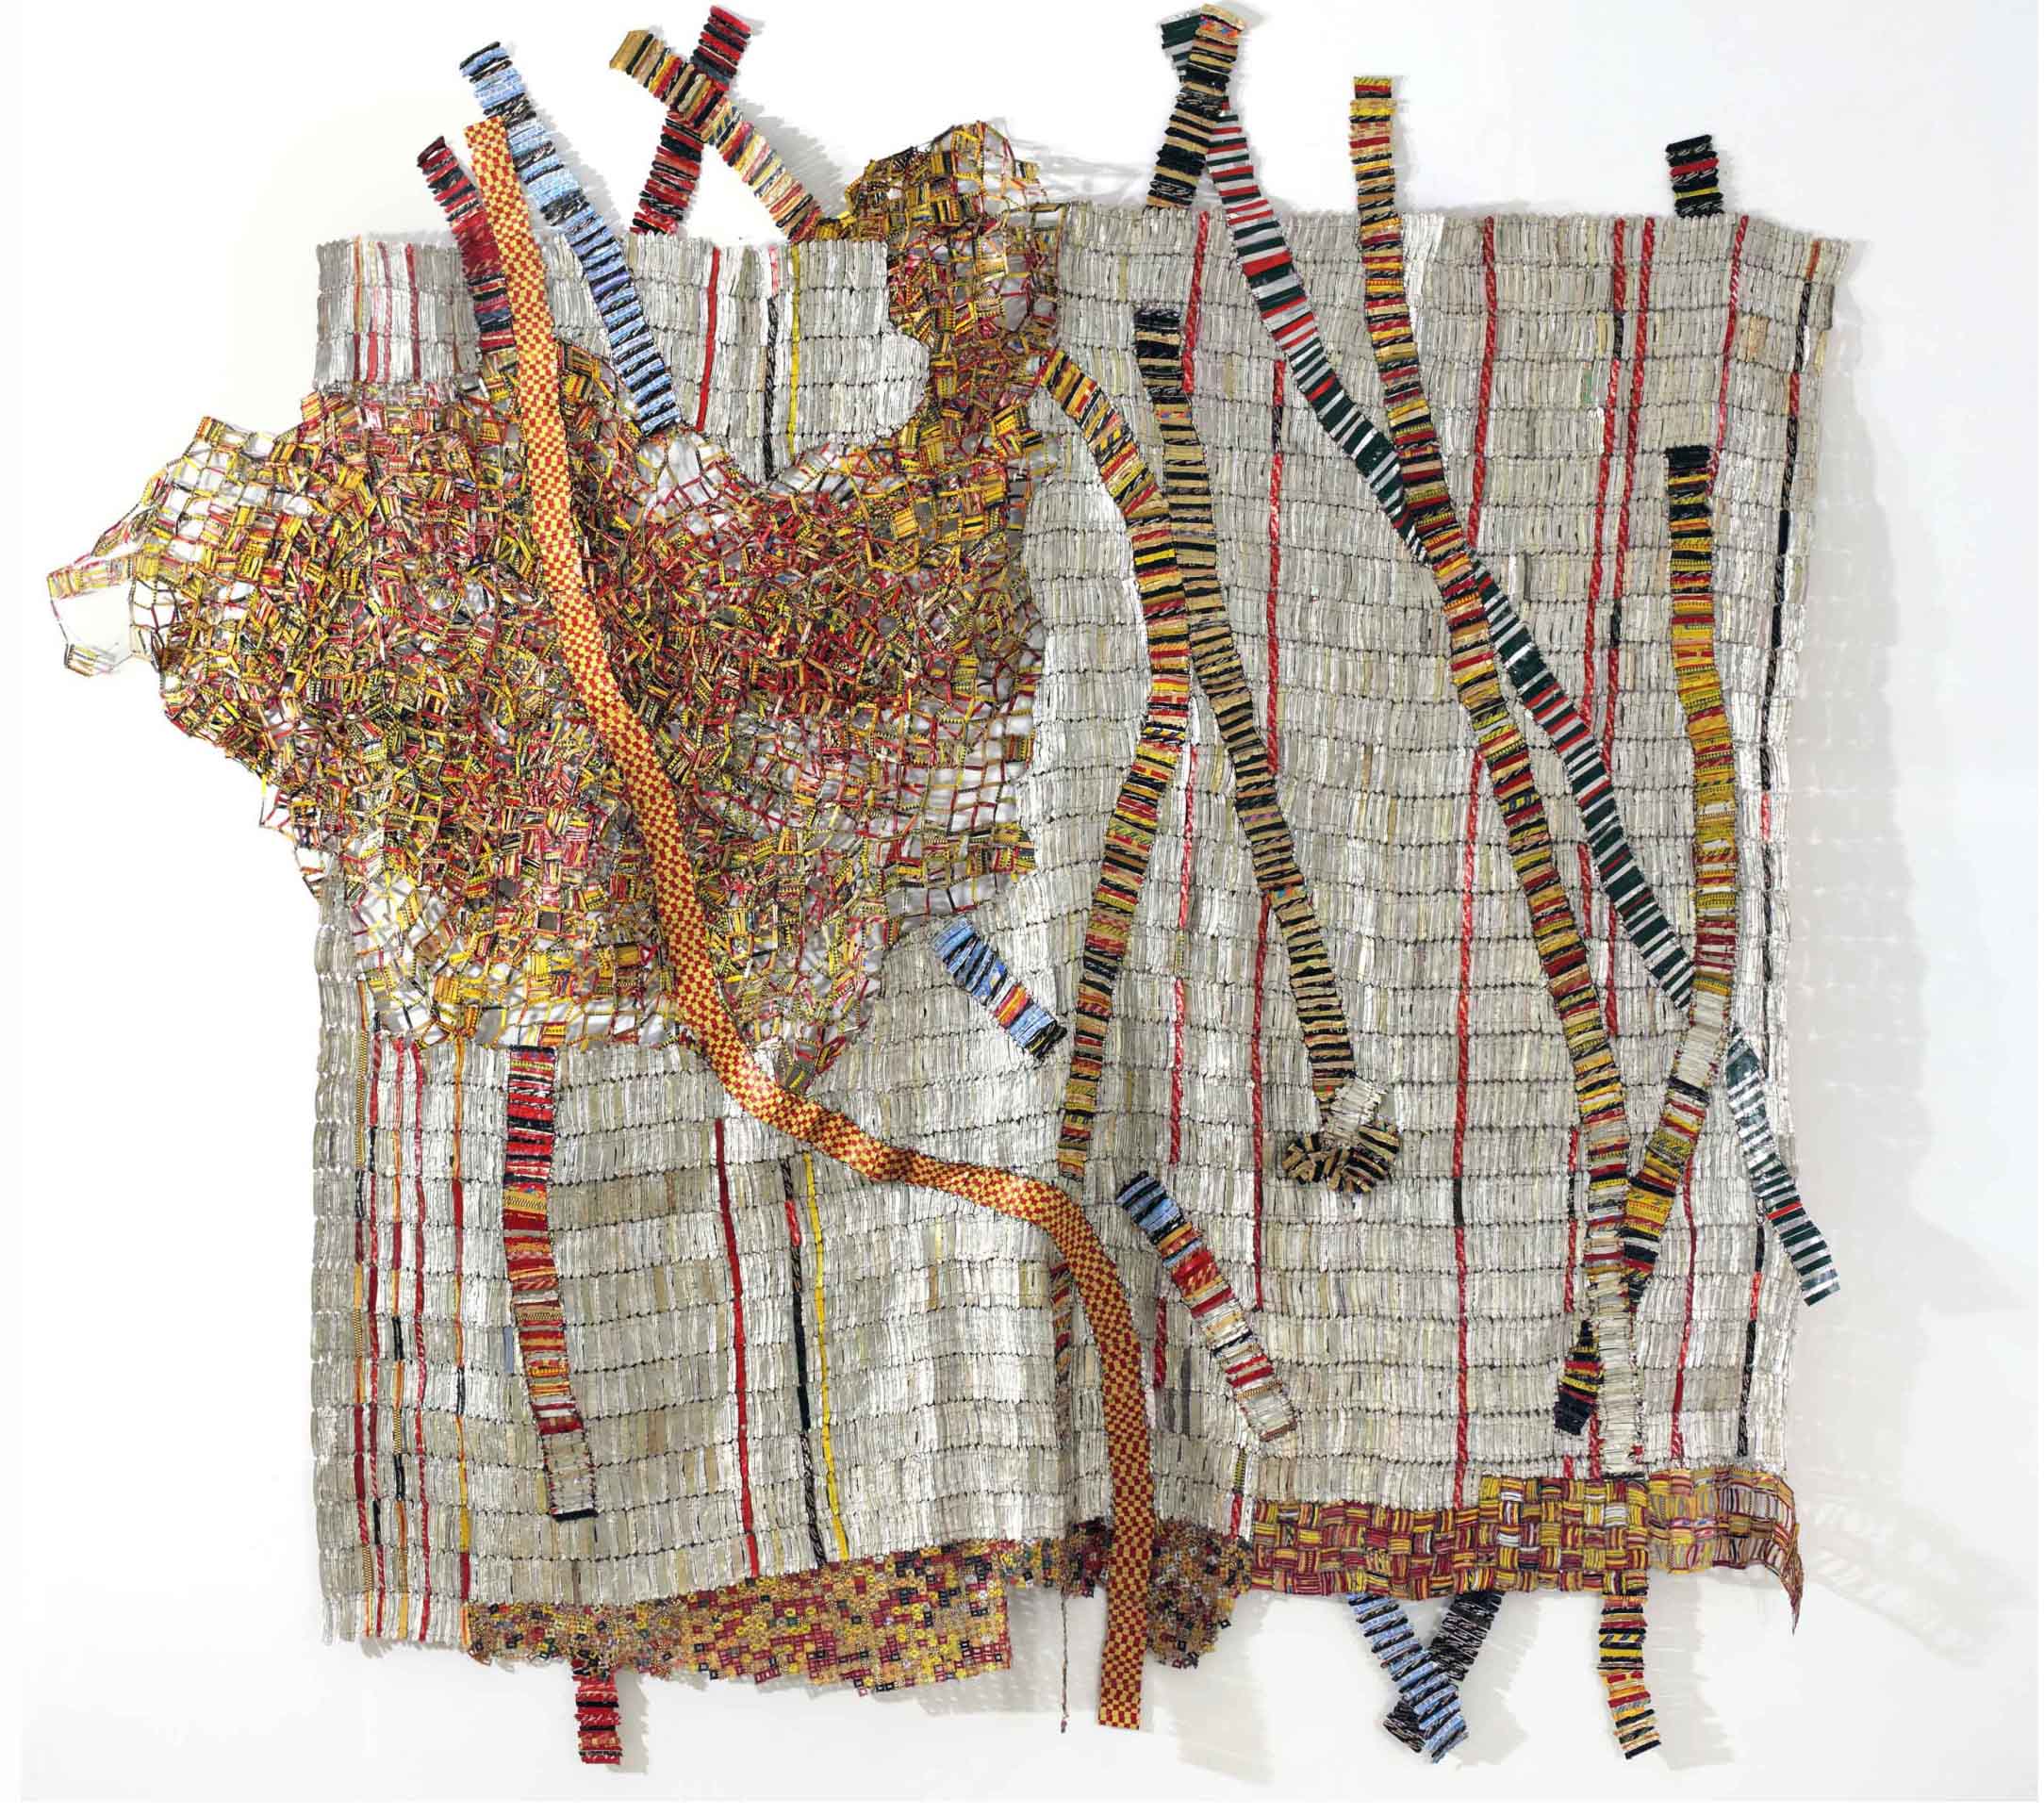 El Anatsui, Earth Developing More Roots